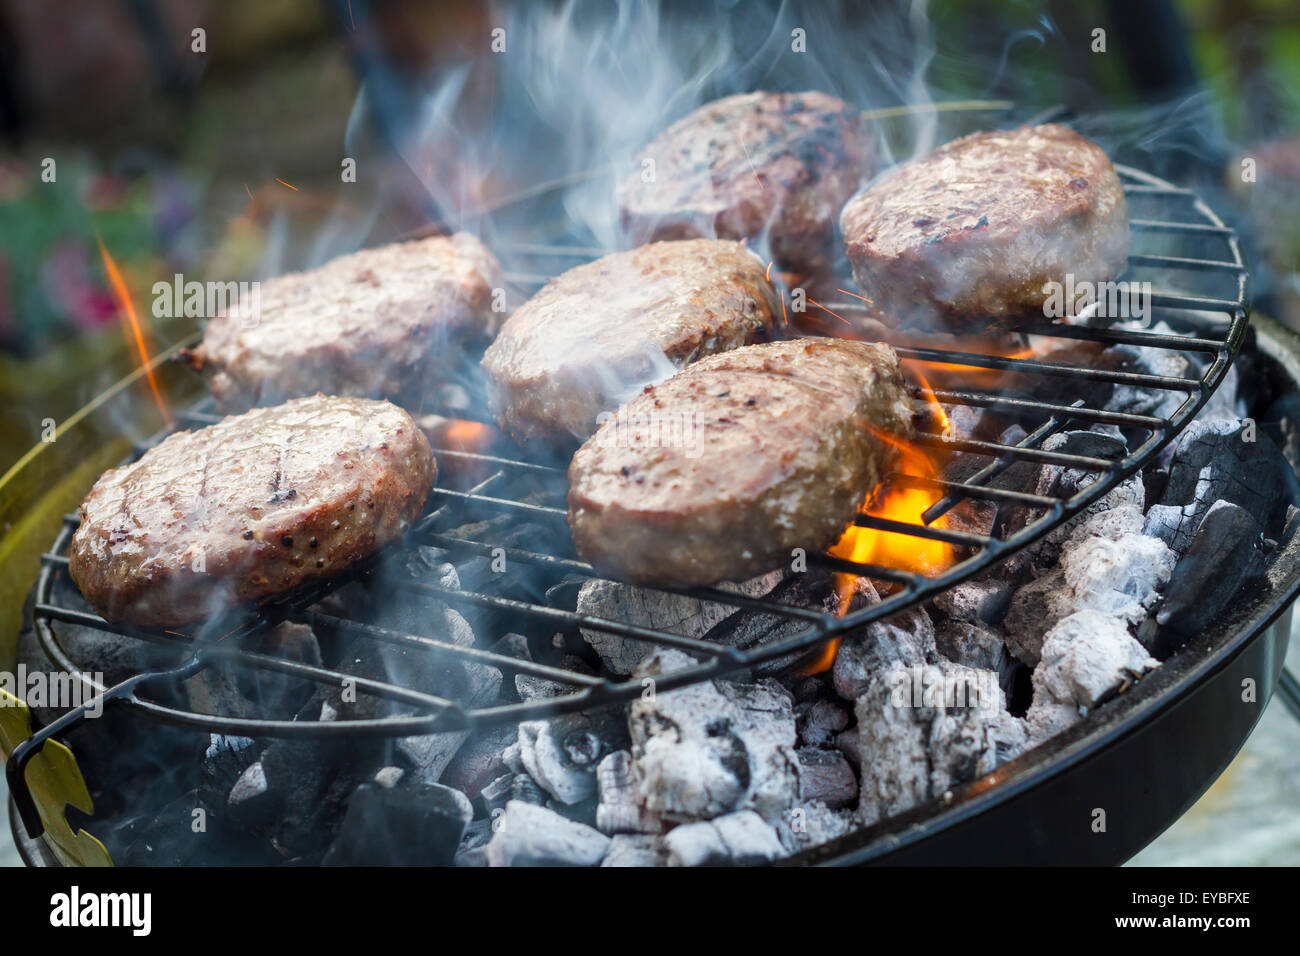 Meat cooking on a BBQ barbecue grill Stock Photo